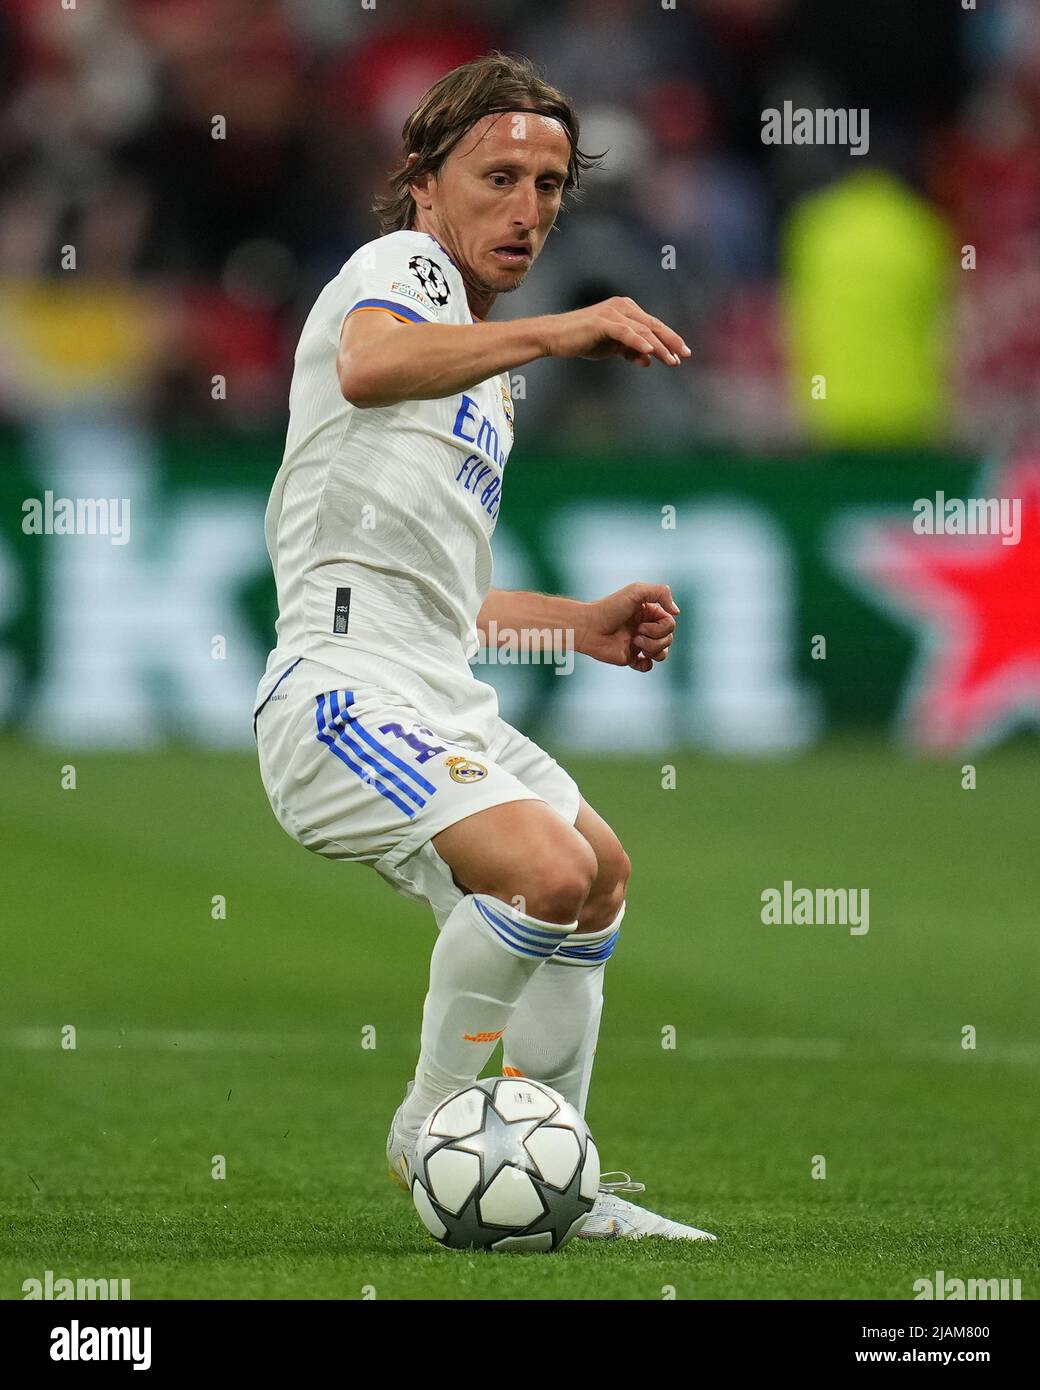 Luka Modric of Real Madrid during the UEFA Champions League Final match between Liverpool FC and Real Madrid played at Stade de France on May 28, 2022 in Paris, France. (Photo by Magma) Stock Photo